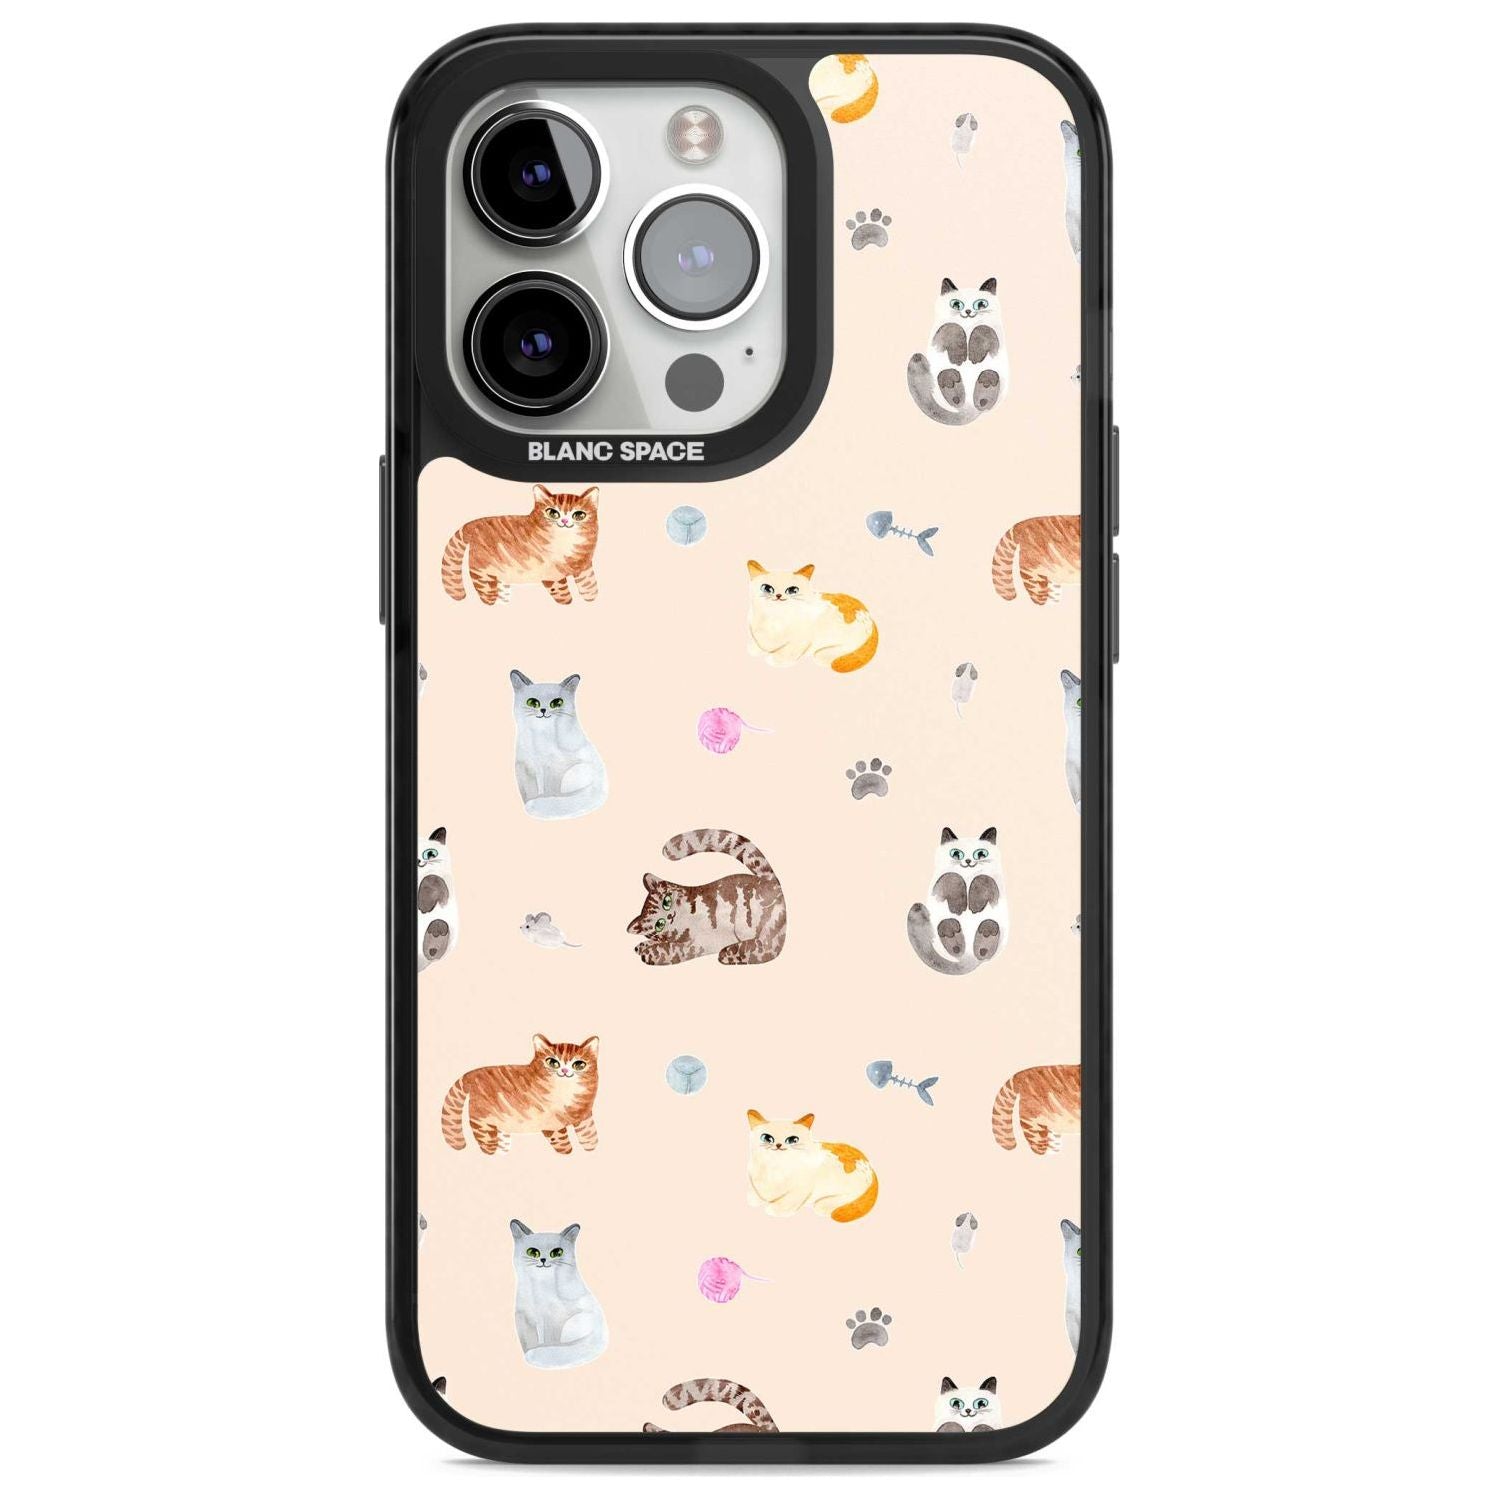 Cats with Toys Phone Case iPhone 15 Pro Max / Magsafe Black Impact Case,iPhone 15 Pro / Magsafe Black Impact Case,iPhone 14 Pro Max / Magsafe Black Impact Case,iPhone 14 Pro / Magsafe Black Impact Case,iPhone 13 Pro / Magsafe Black Impact Case Blanc Space